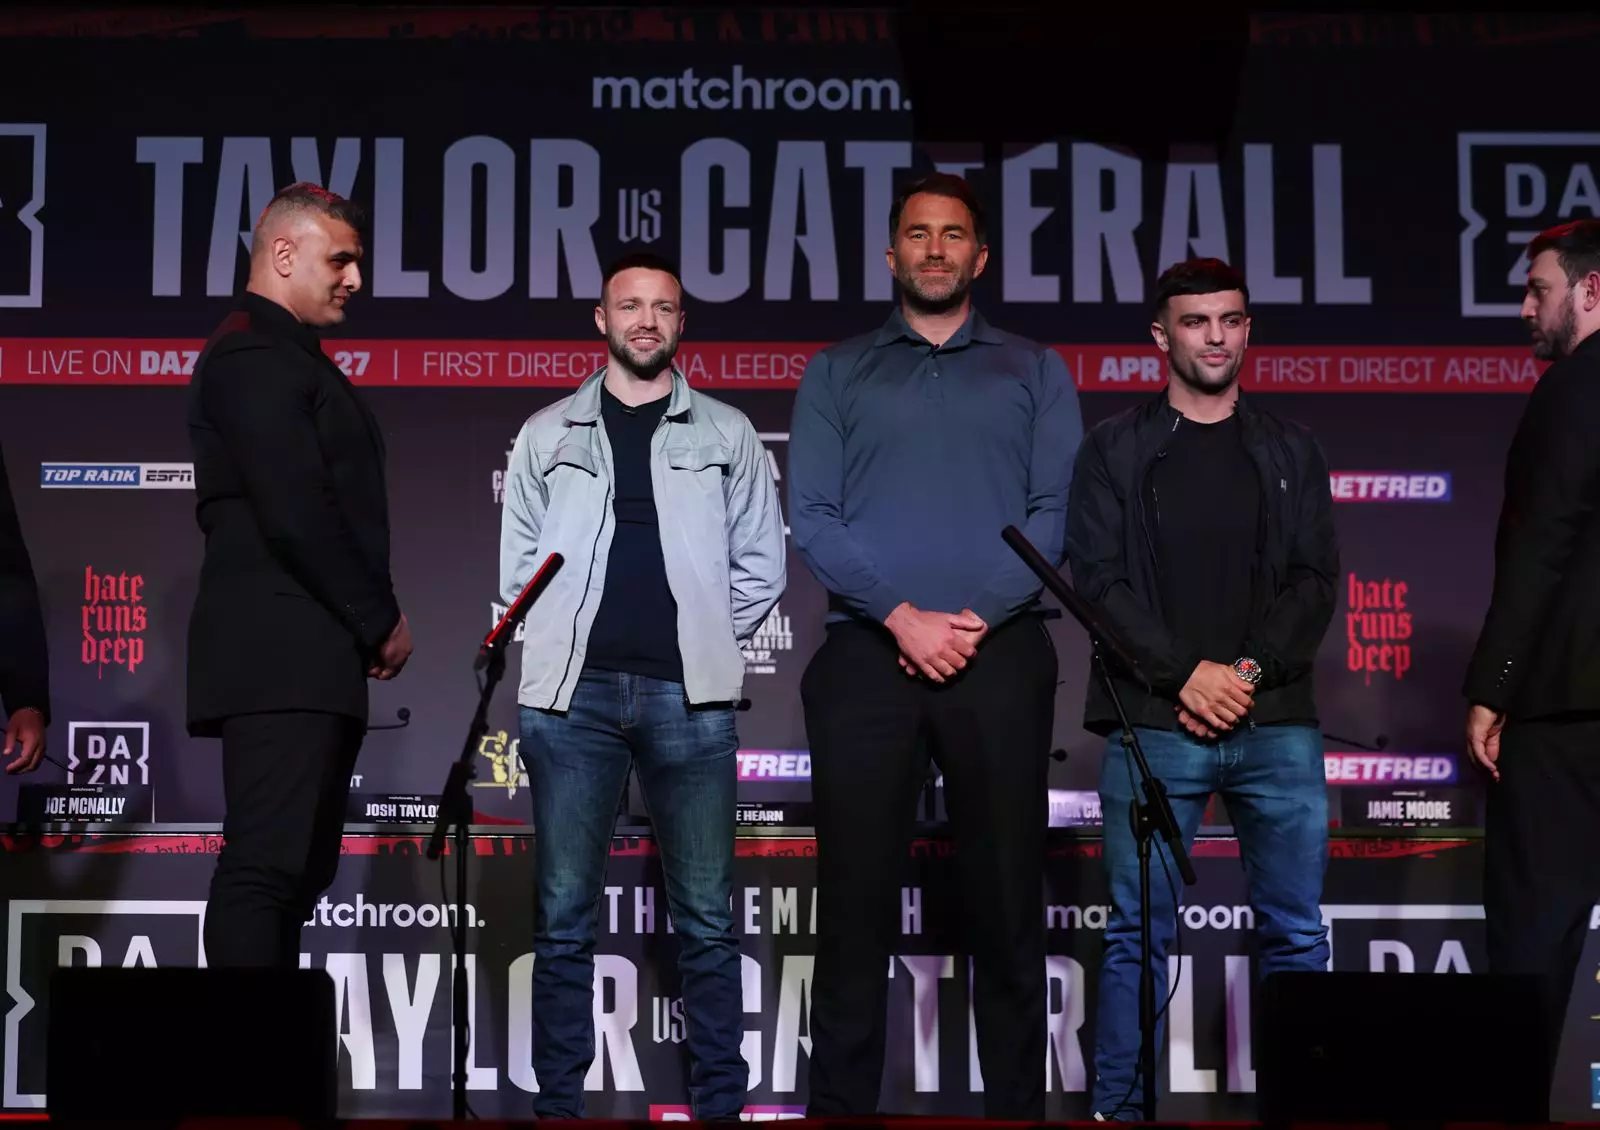 Josh Taylor vs. Jack Catterall Rematch: A Tale of Unfinished Business